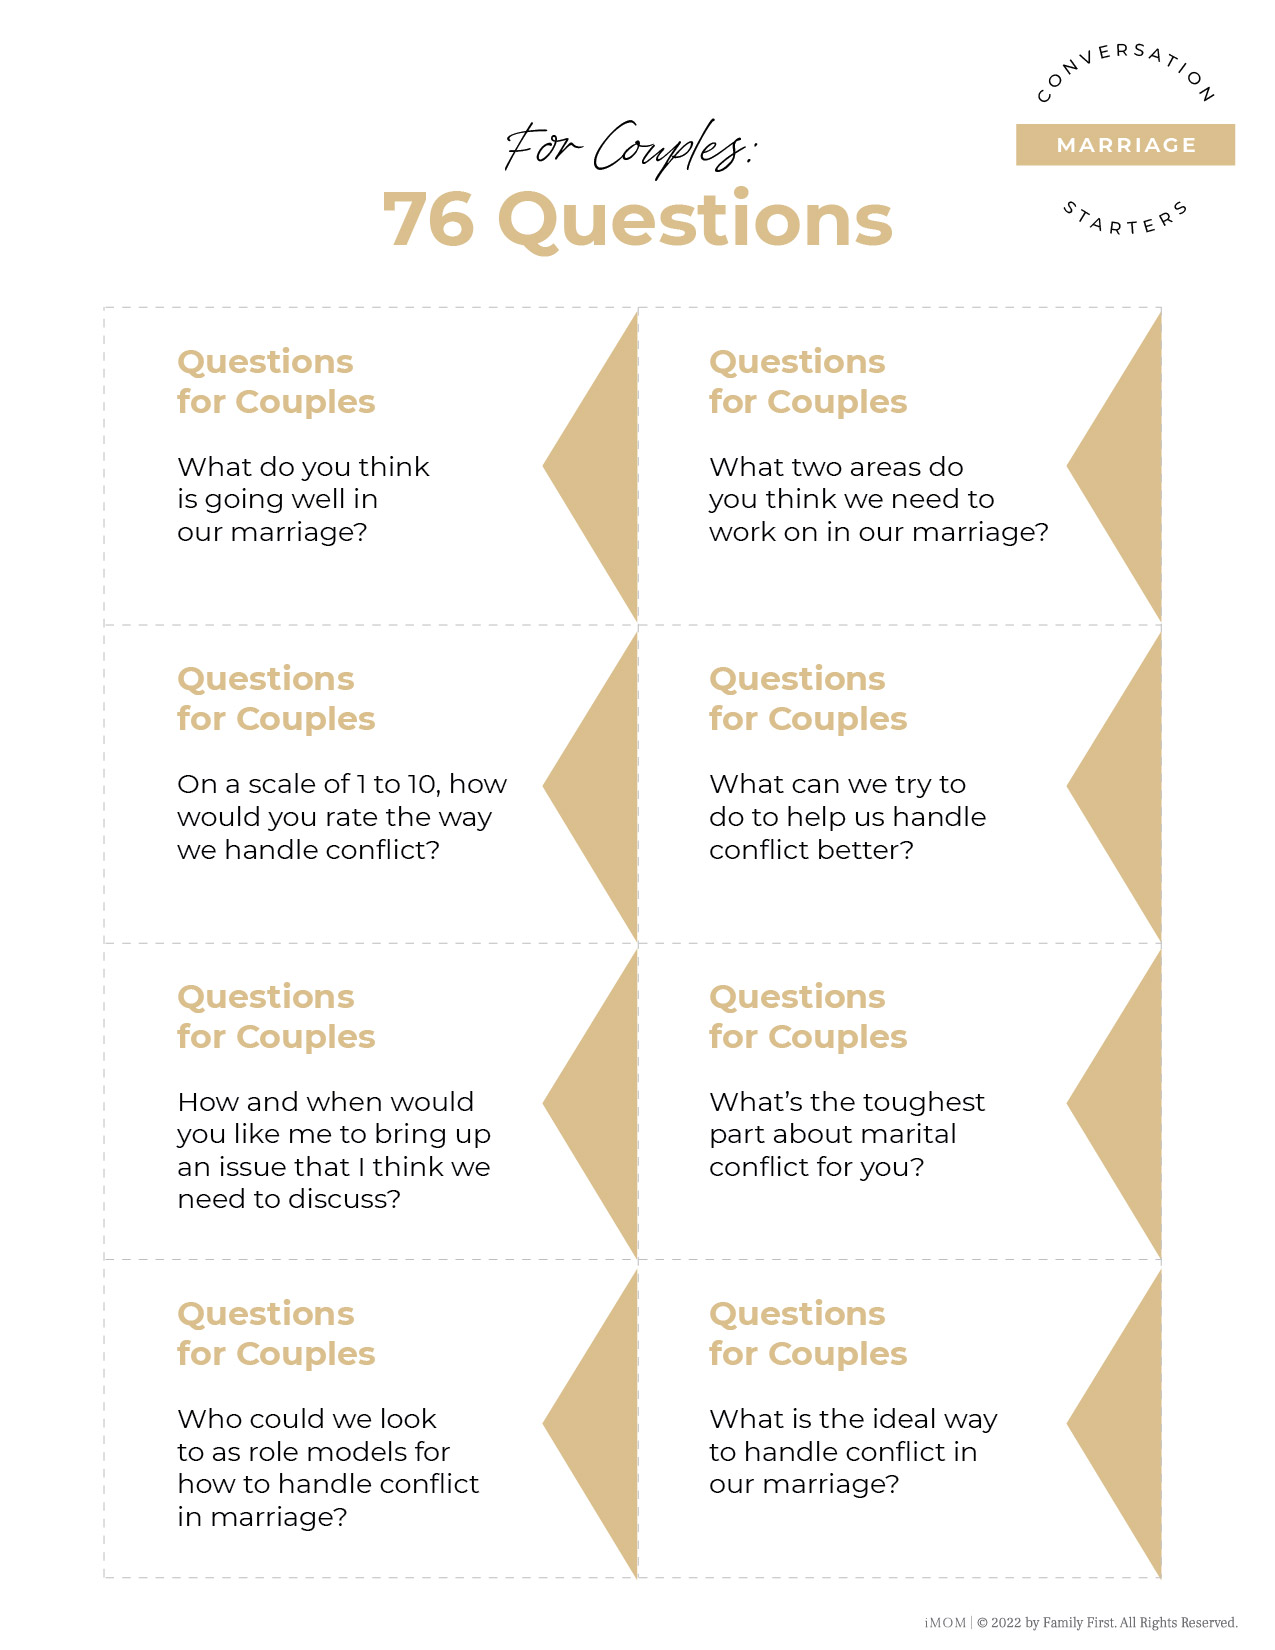 conversation starters for married couples